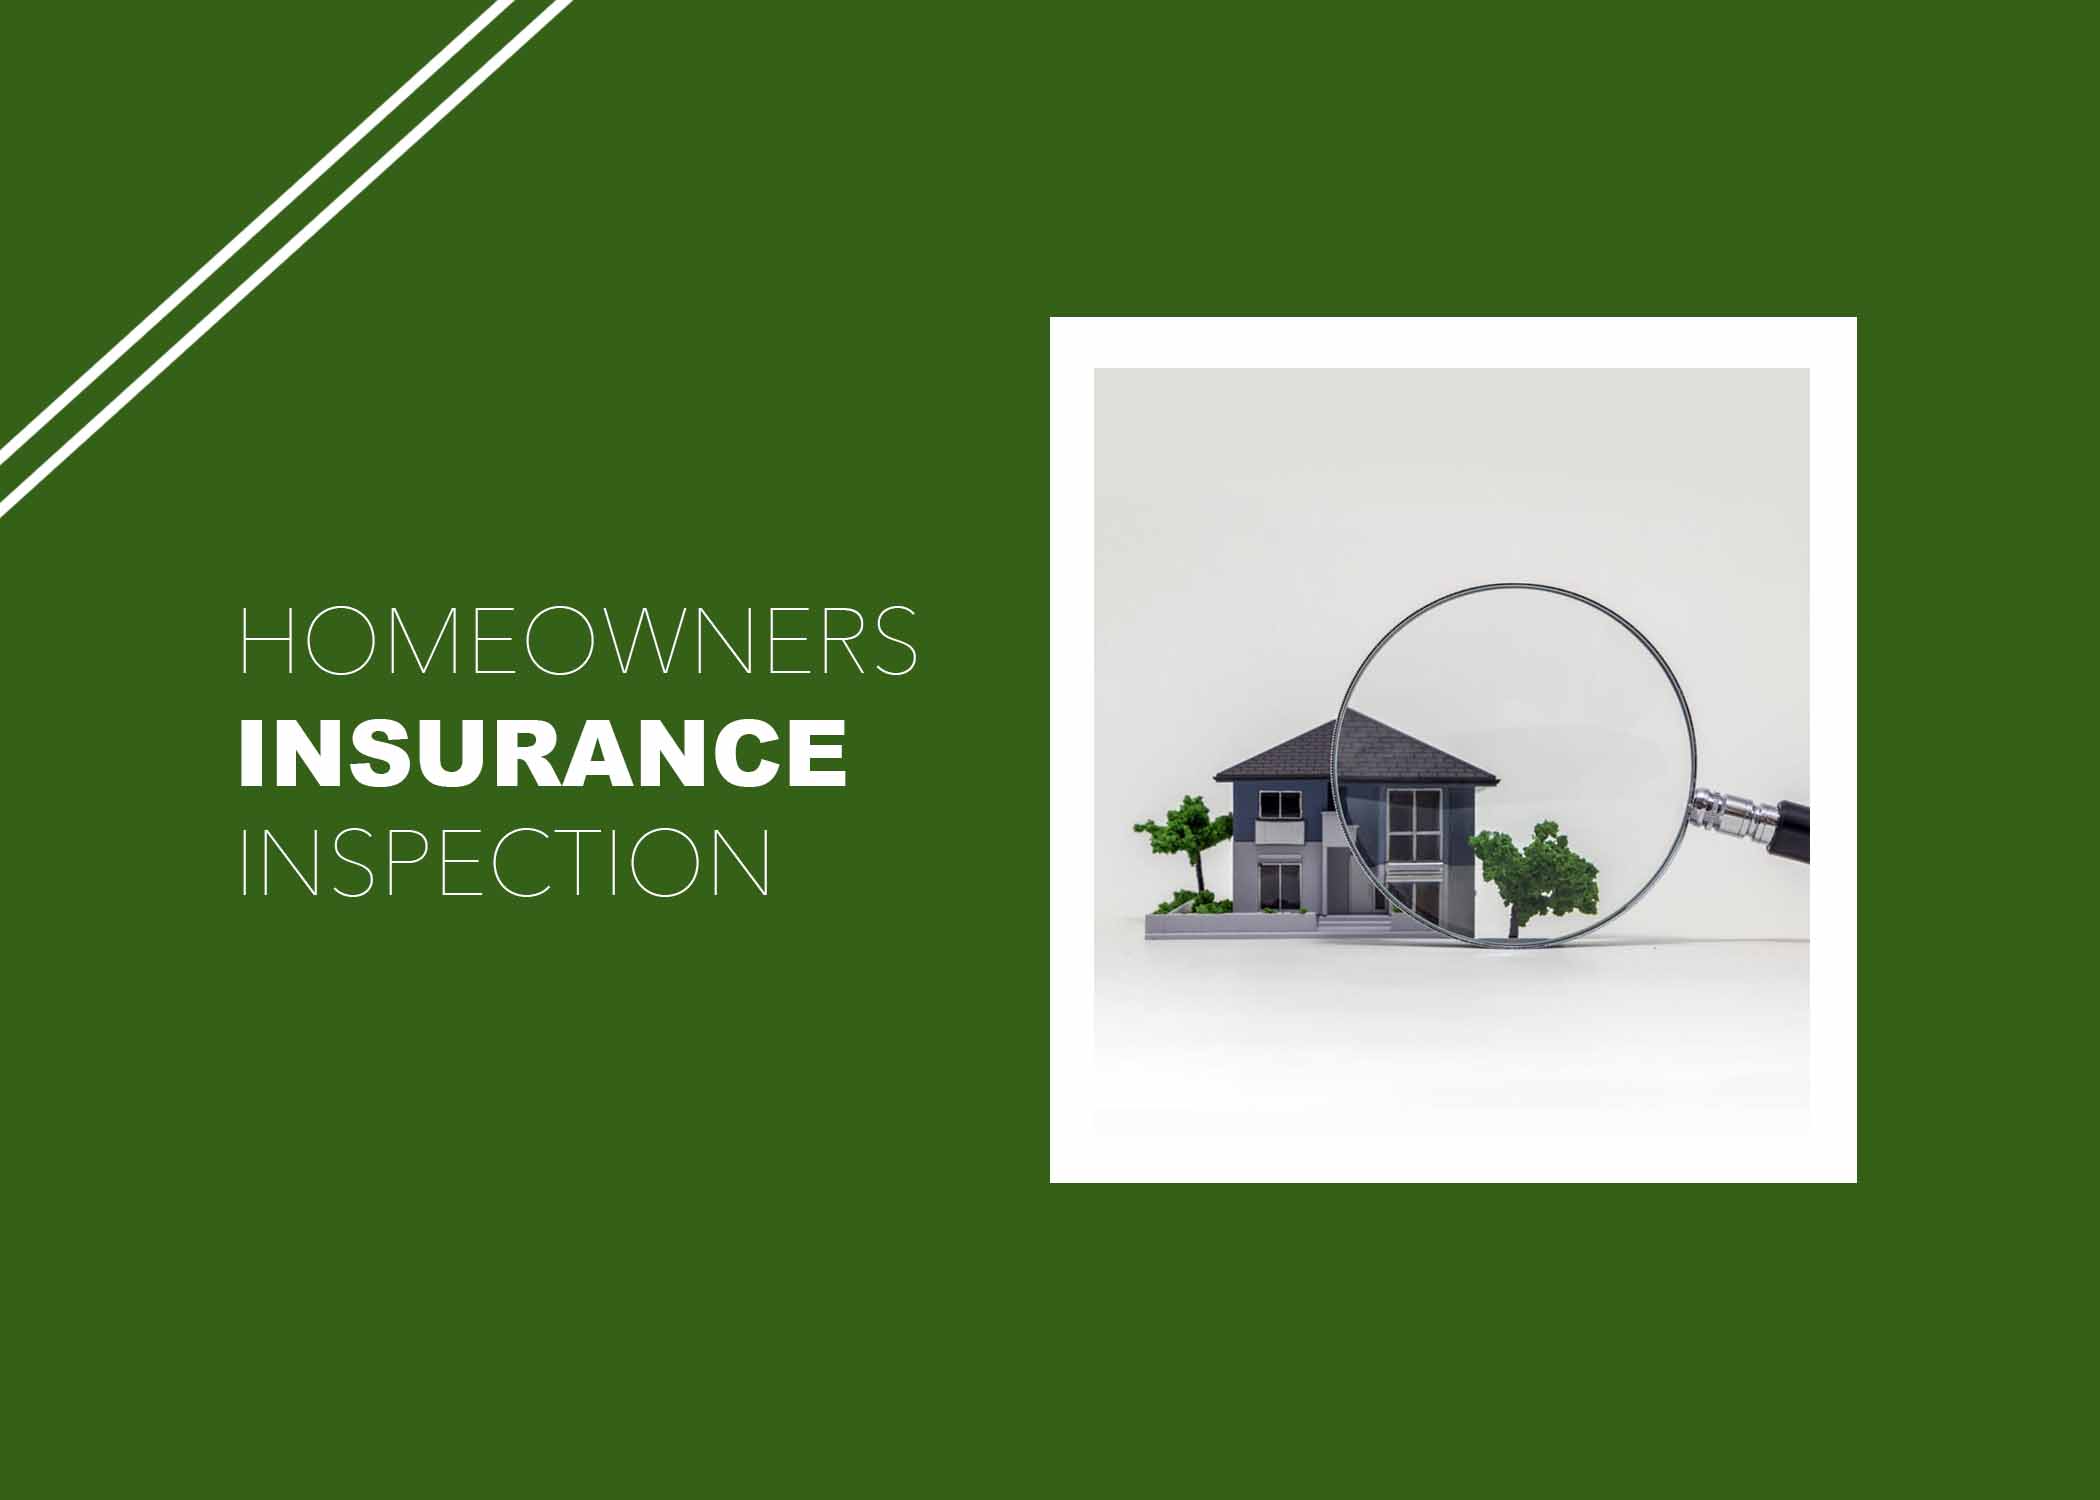 Homeowners Insurance Inspection